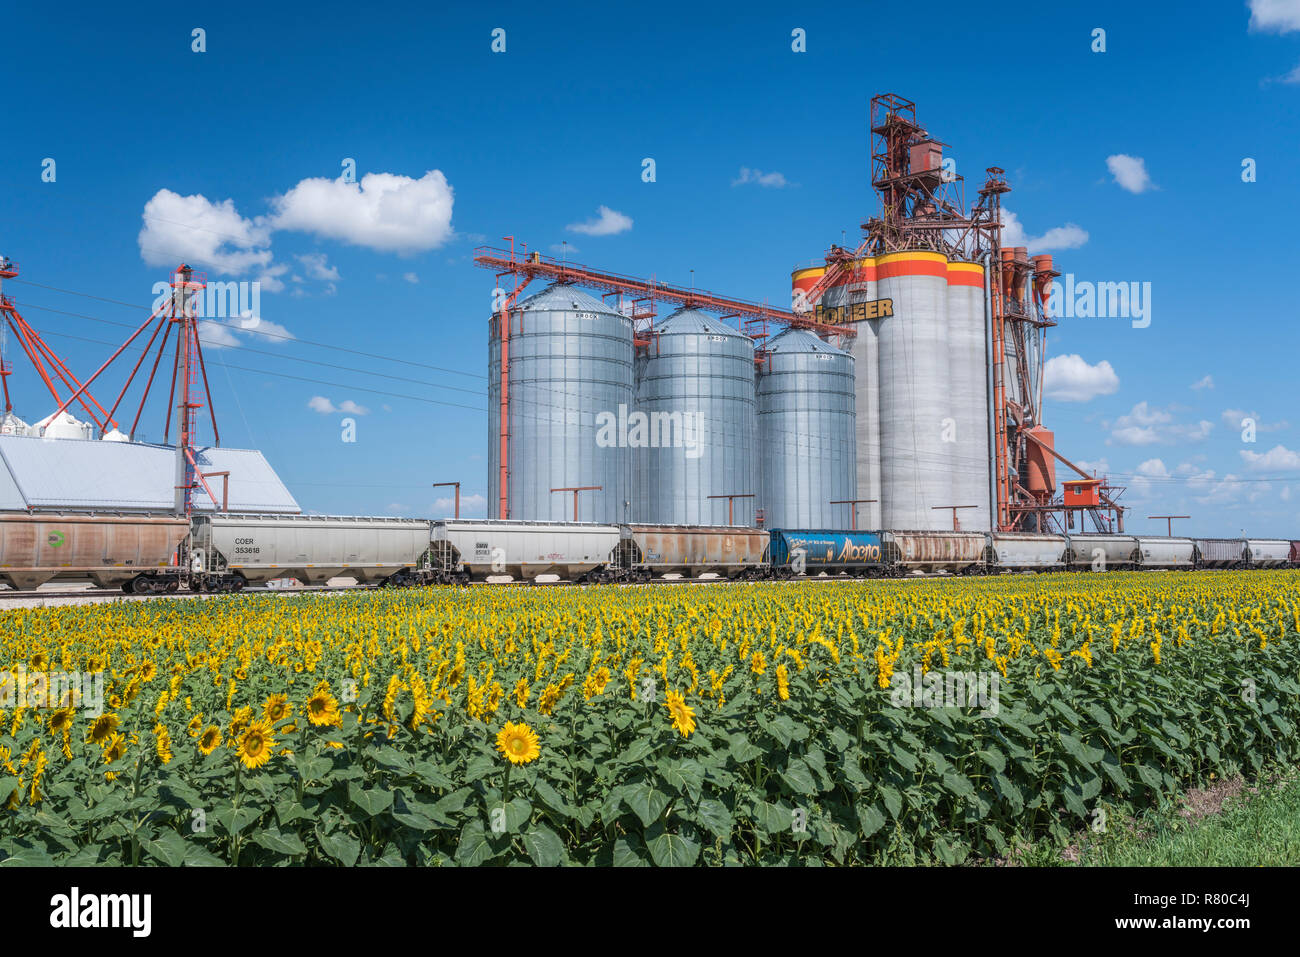 A Pioneer Grain inland grain handling terminal and a blooming sunflower field near Brunkild, Manitoba, Canada. Stock Photo